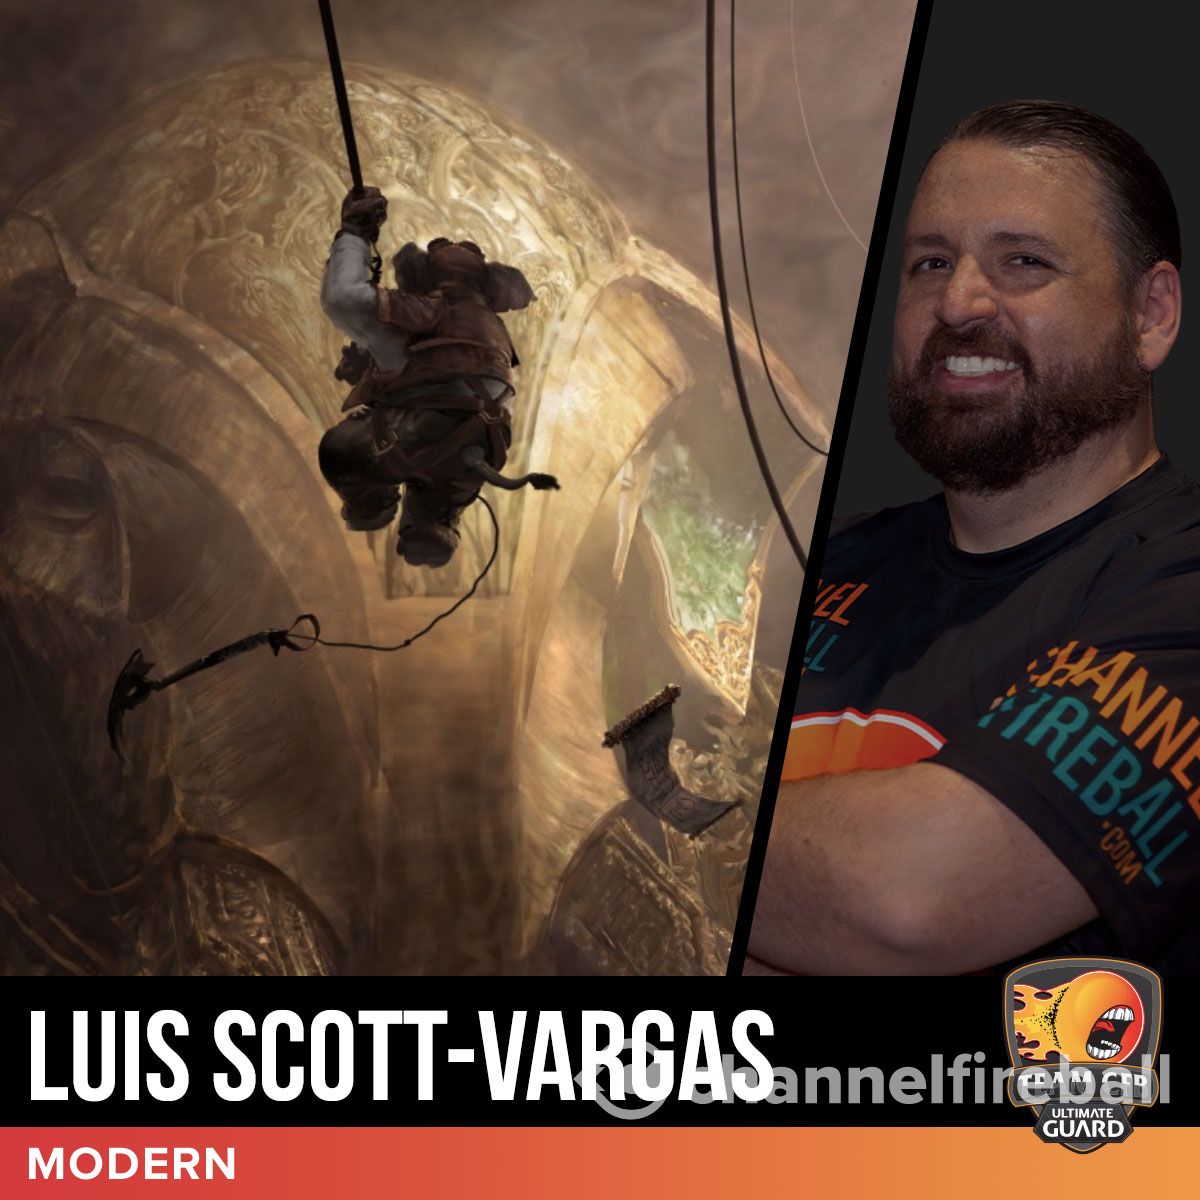 Luis Scott-Vargas  ChannelFireball: For The Best Card Game Content